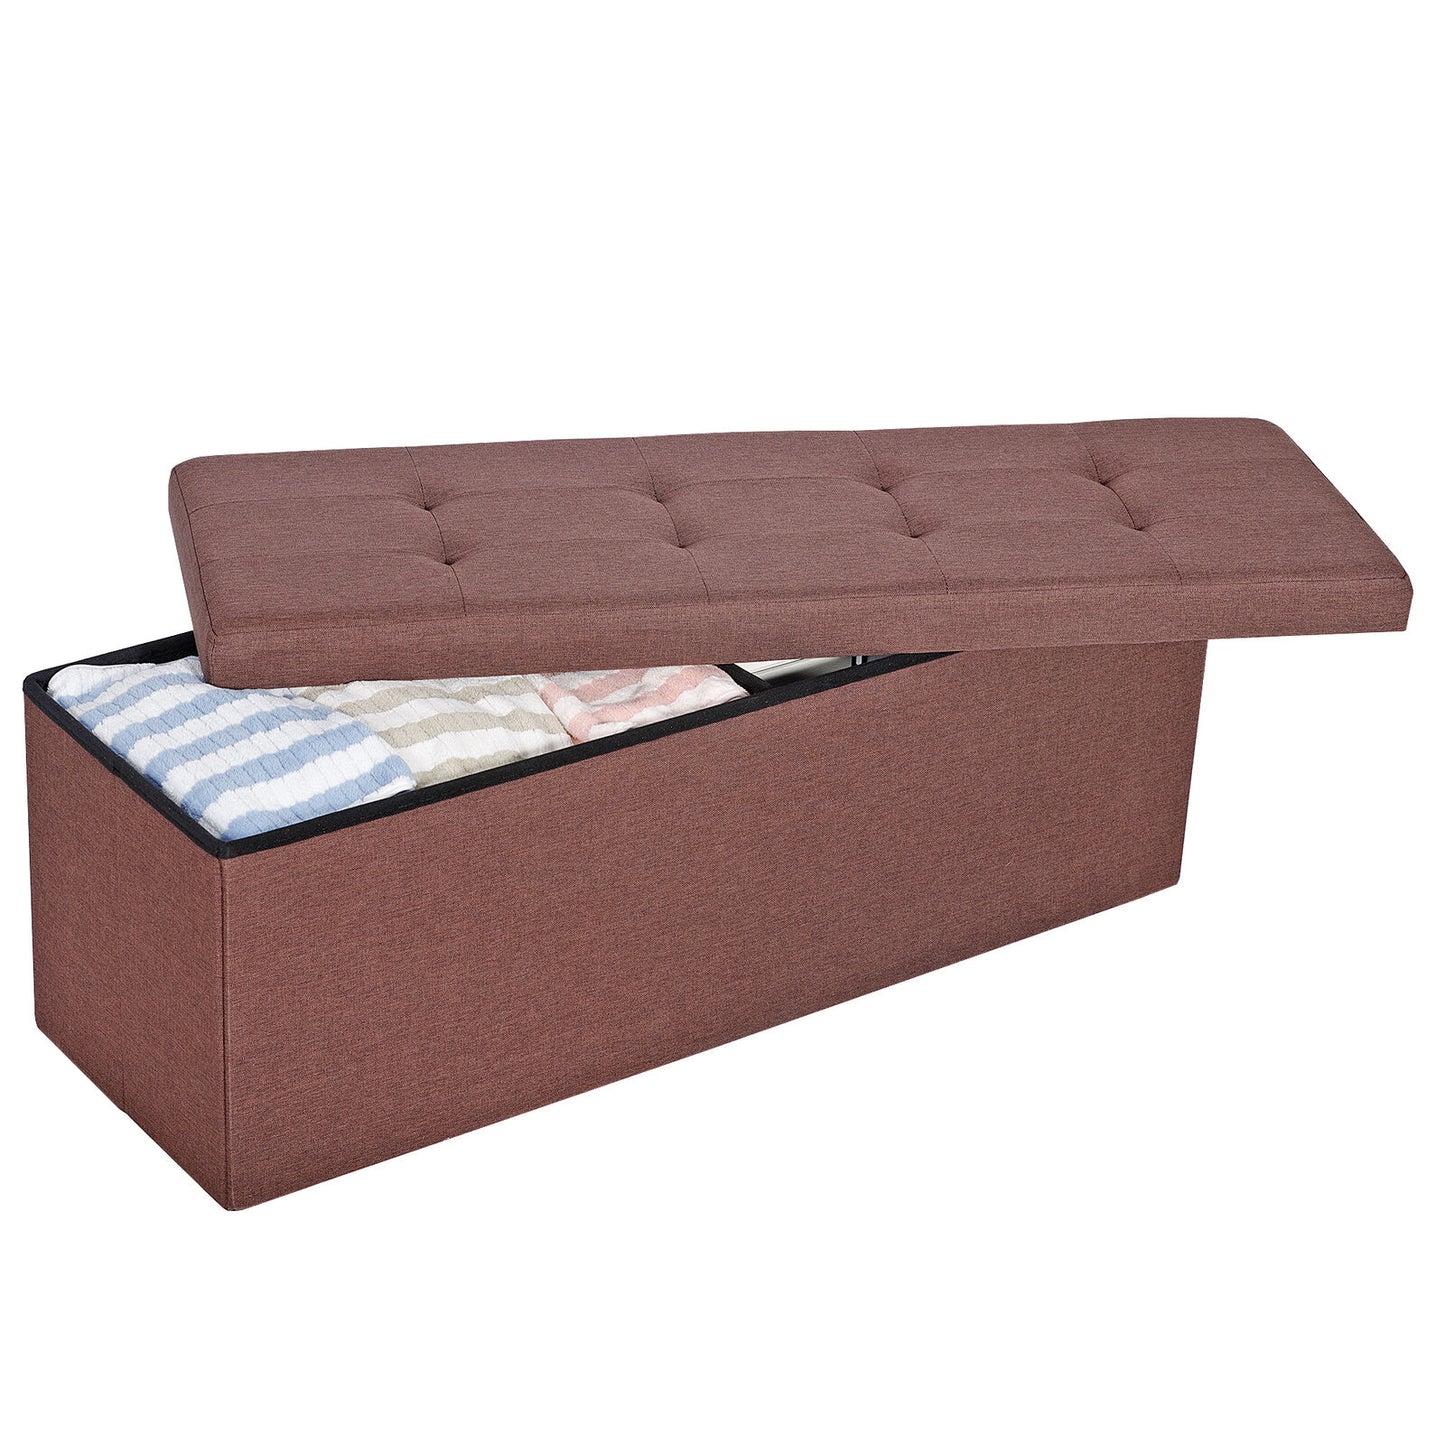 43" Storage Ottoman Bench Folding Chest Footrest Stool MDF Frame With Lid Brown